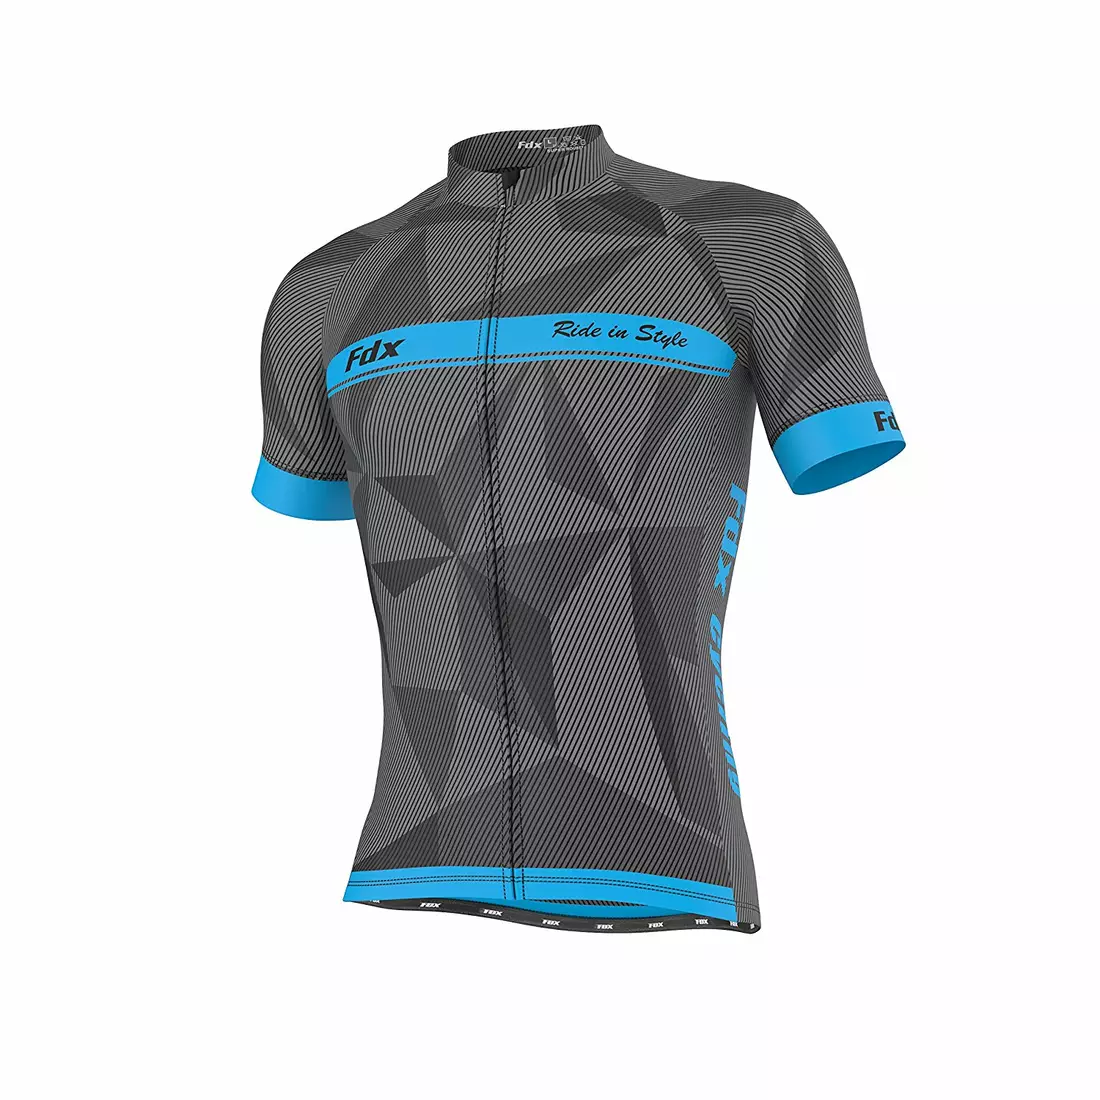 FDX 1270 black and blue cycling jersey